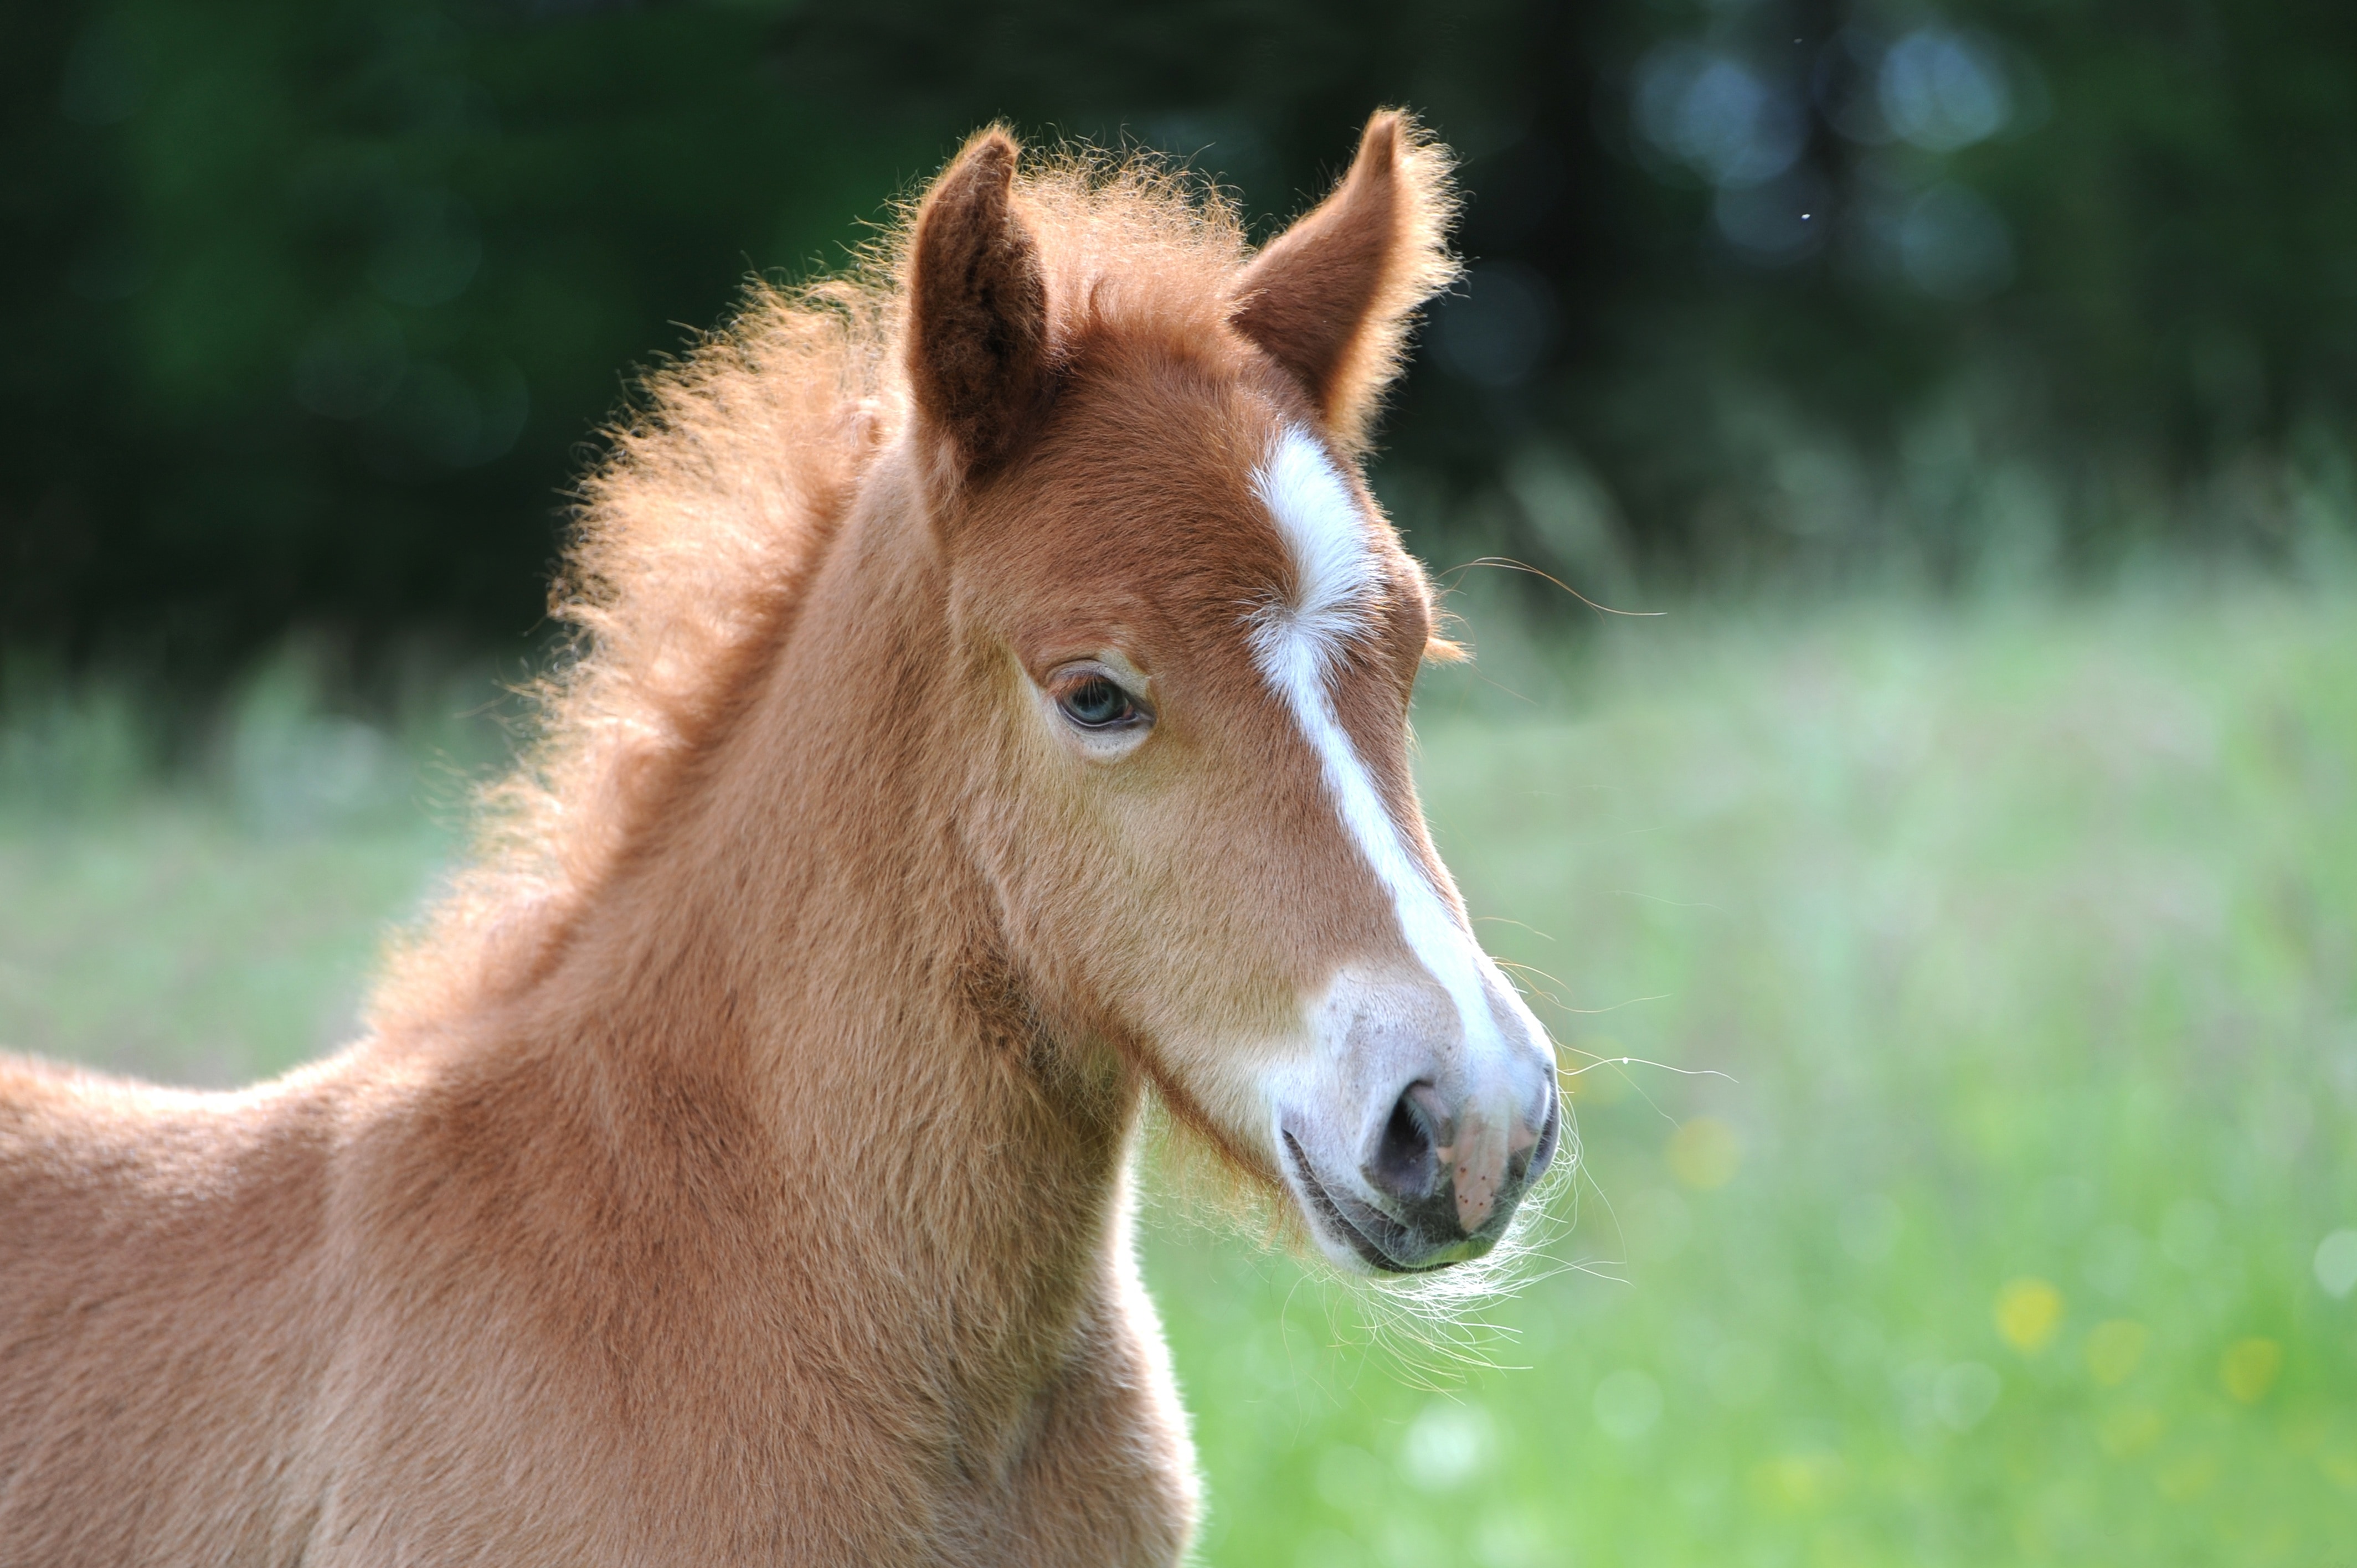 Iceland Foal, Foal, Cute, Iceland Horse, one animal, animal body part